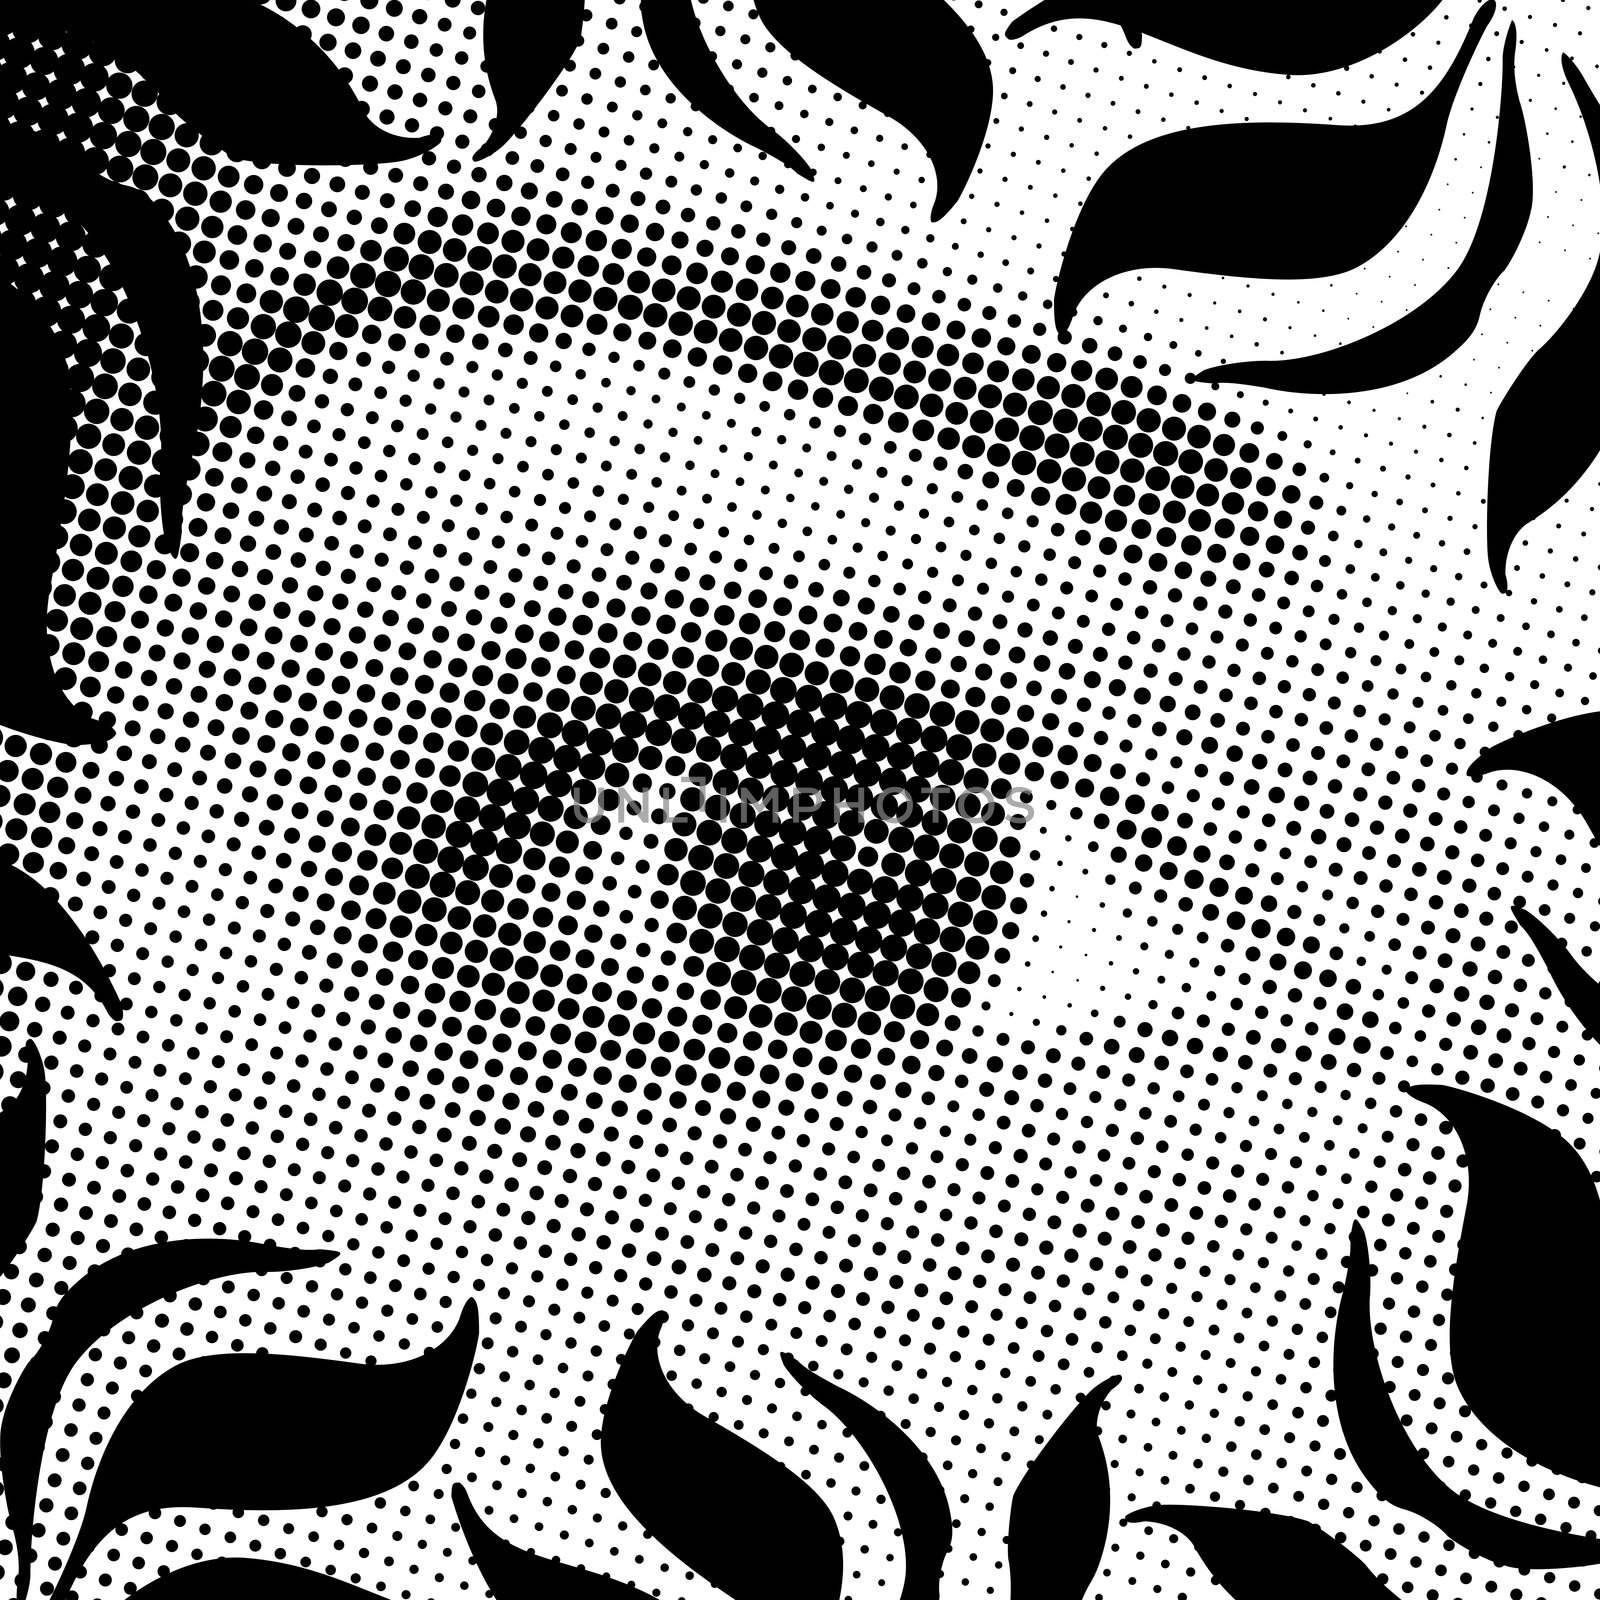 a halftone eye illustration with a floral border- all in black and white